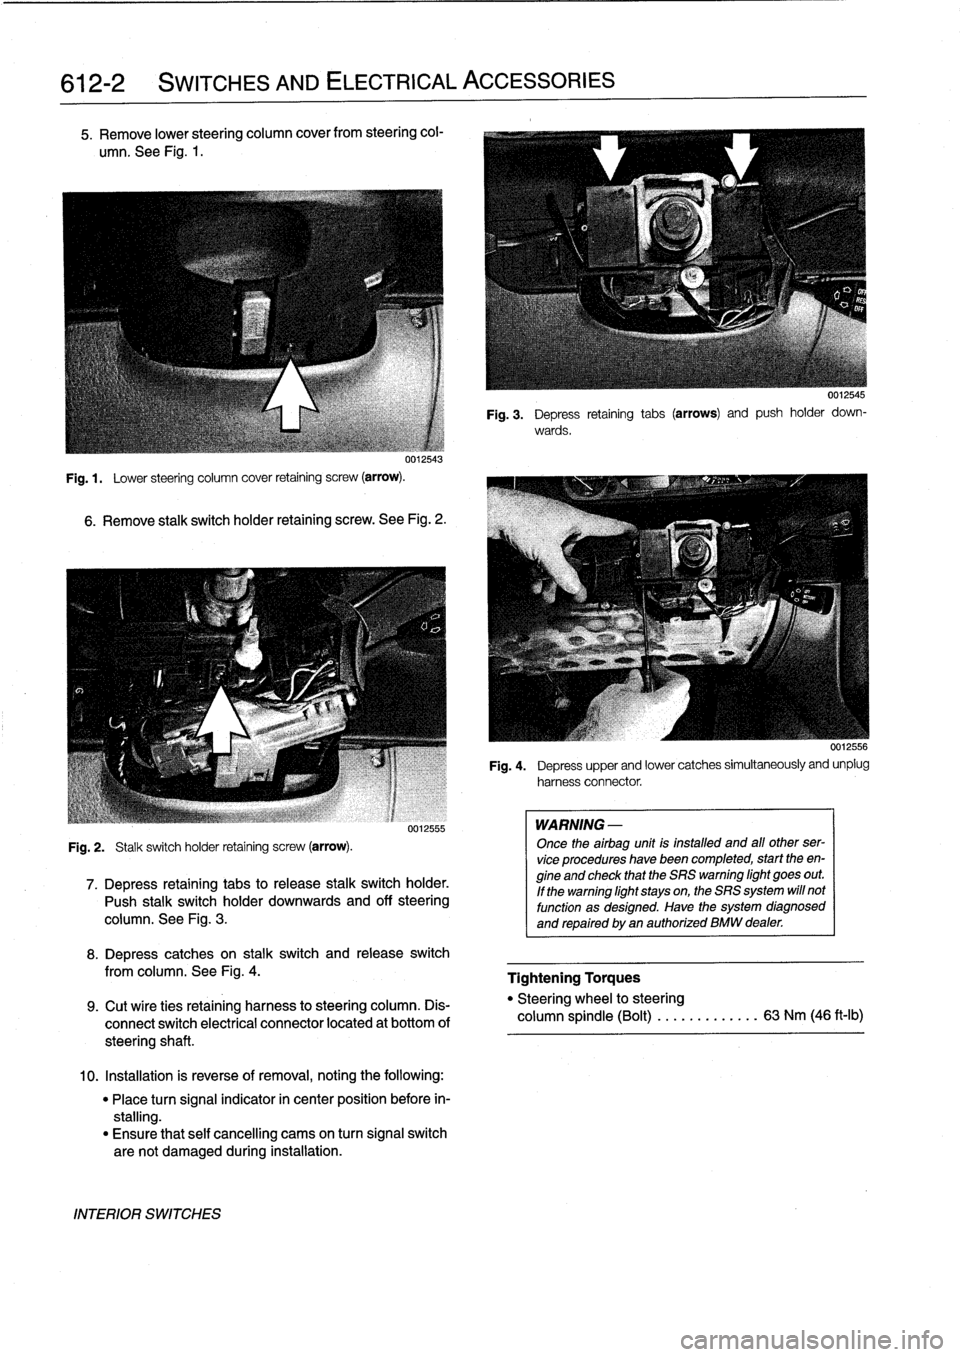 BMW 323i 1993 E36 Manual PDF 
612-2

	

SWITCHES
AND
ELECTRICAL
ACCESSORIES

5
.
Remove
lower
steering
column
cover
from
steering
col-

umn
.
See
Fig
.
1
.

uu12543

Fig
.
1
.

	

Lower
steering
column
cover
retaining
screw
(arro